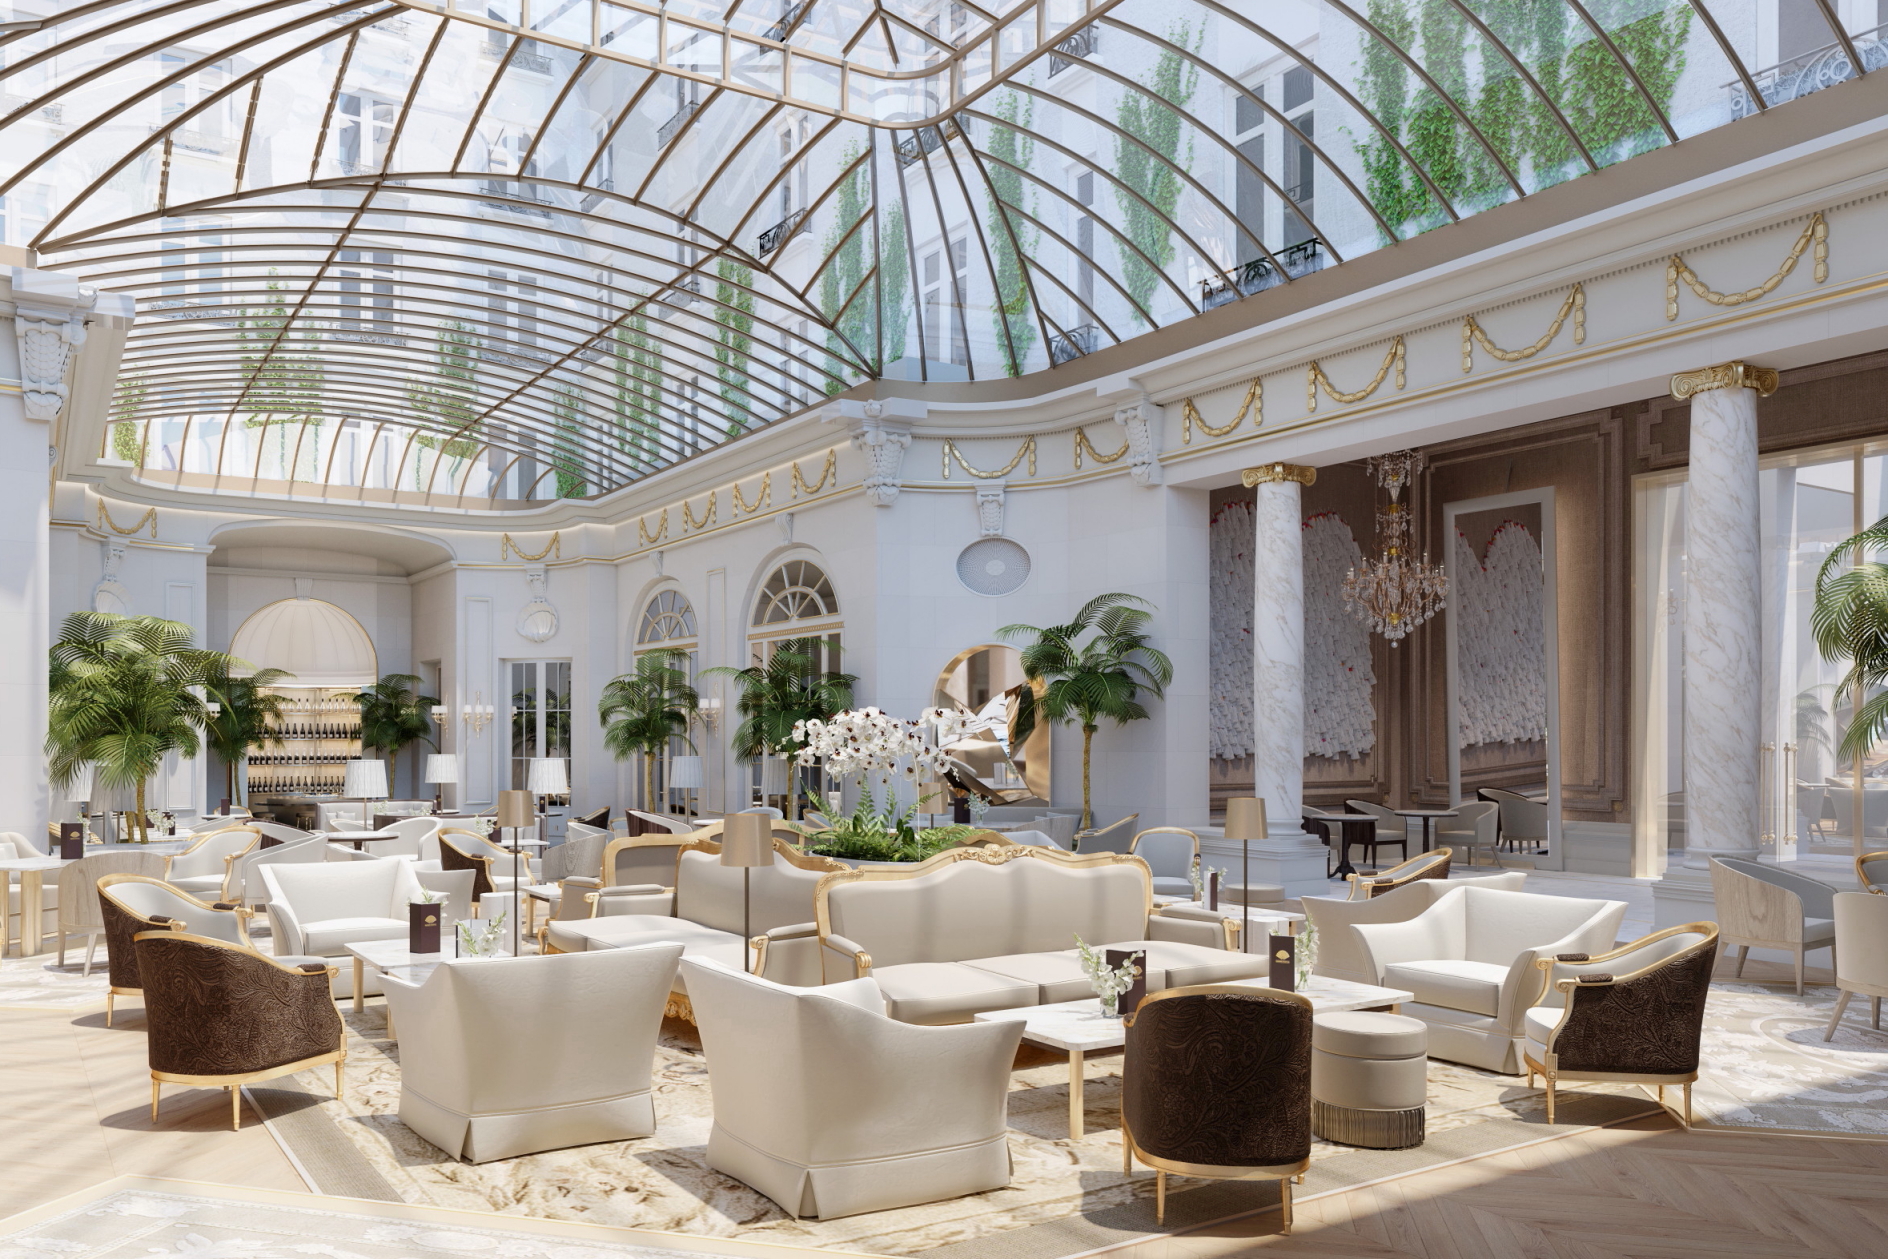 Palm Court at the Mandarin Oriental Madrid Click to enlarge.